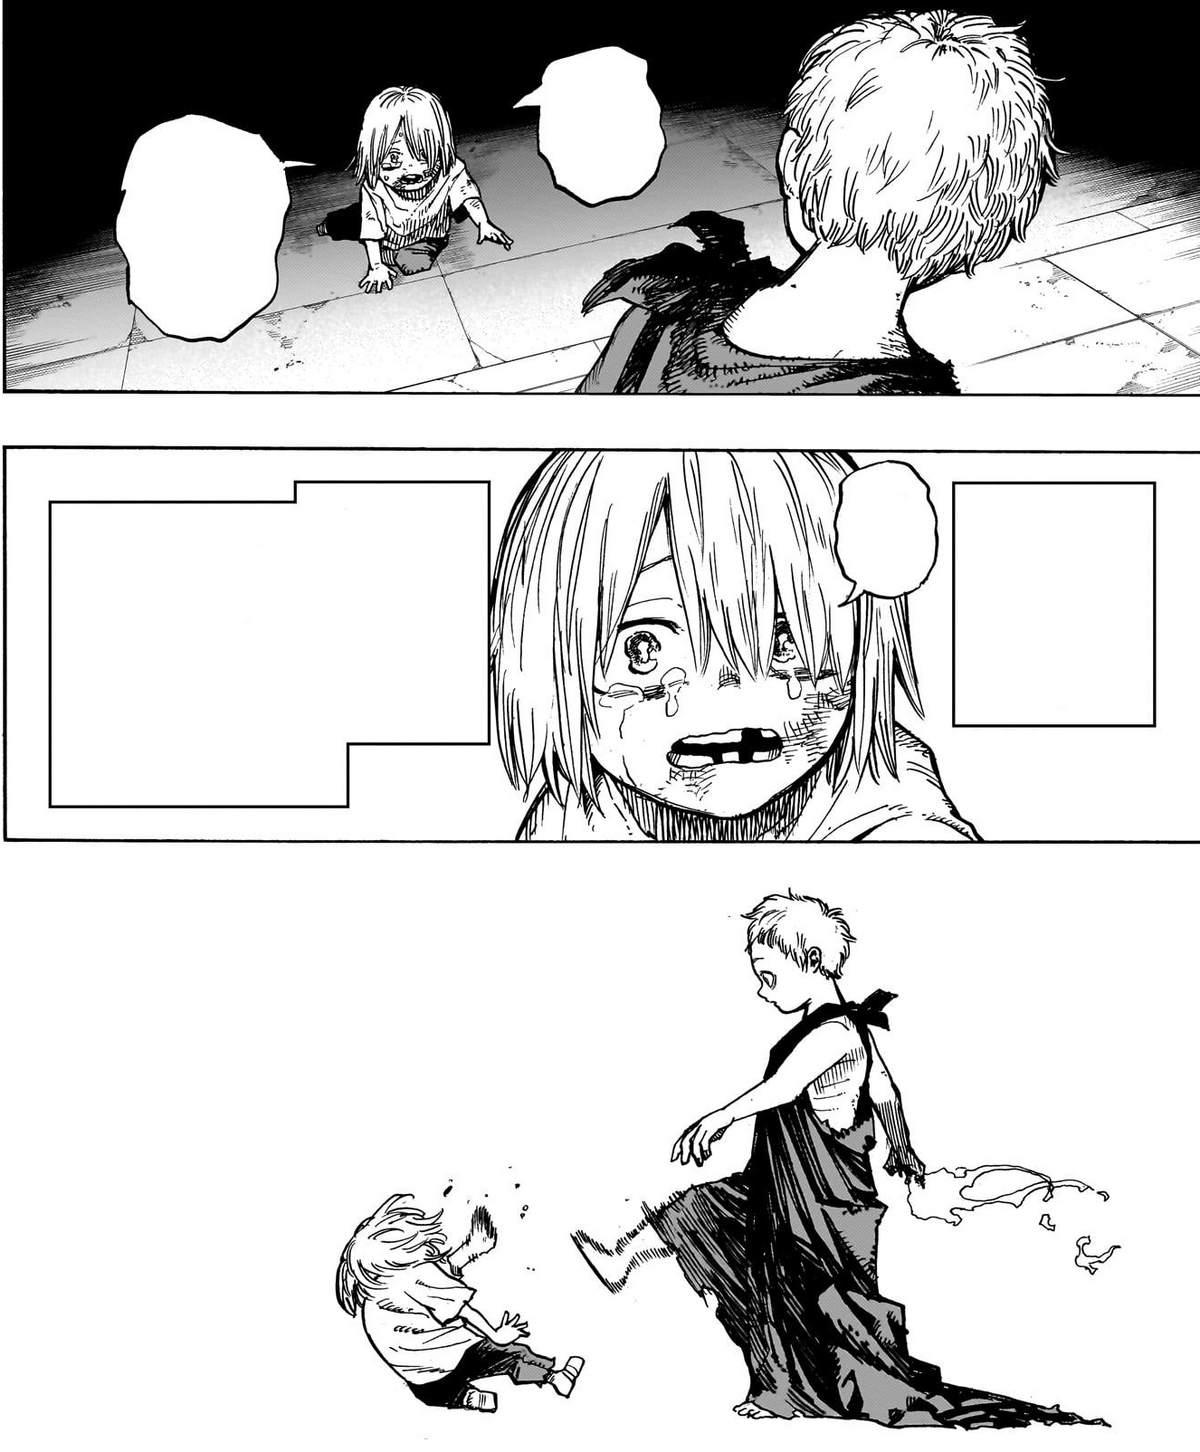 Chainsaw Man's First Season Finale Ruins One Important Manga Moment